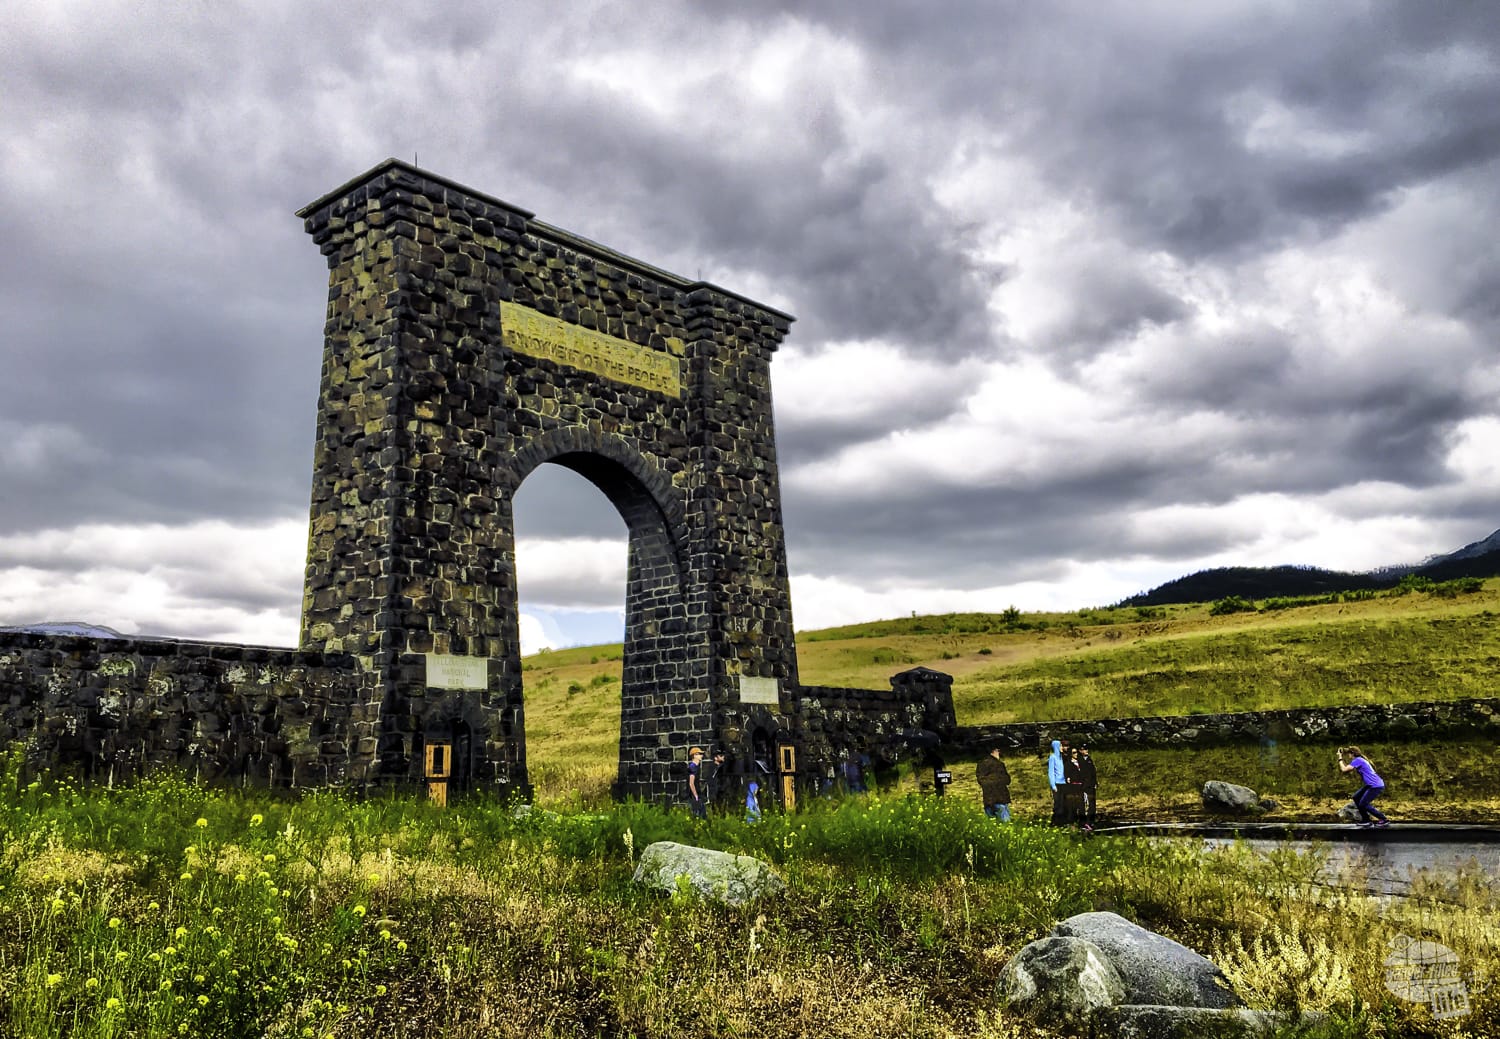 The Roosevelt Arch at the north entrance to Yellowstone